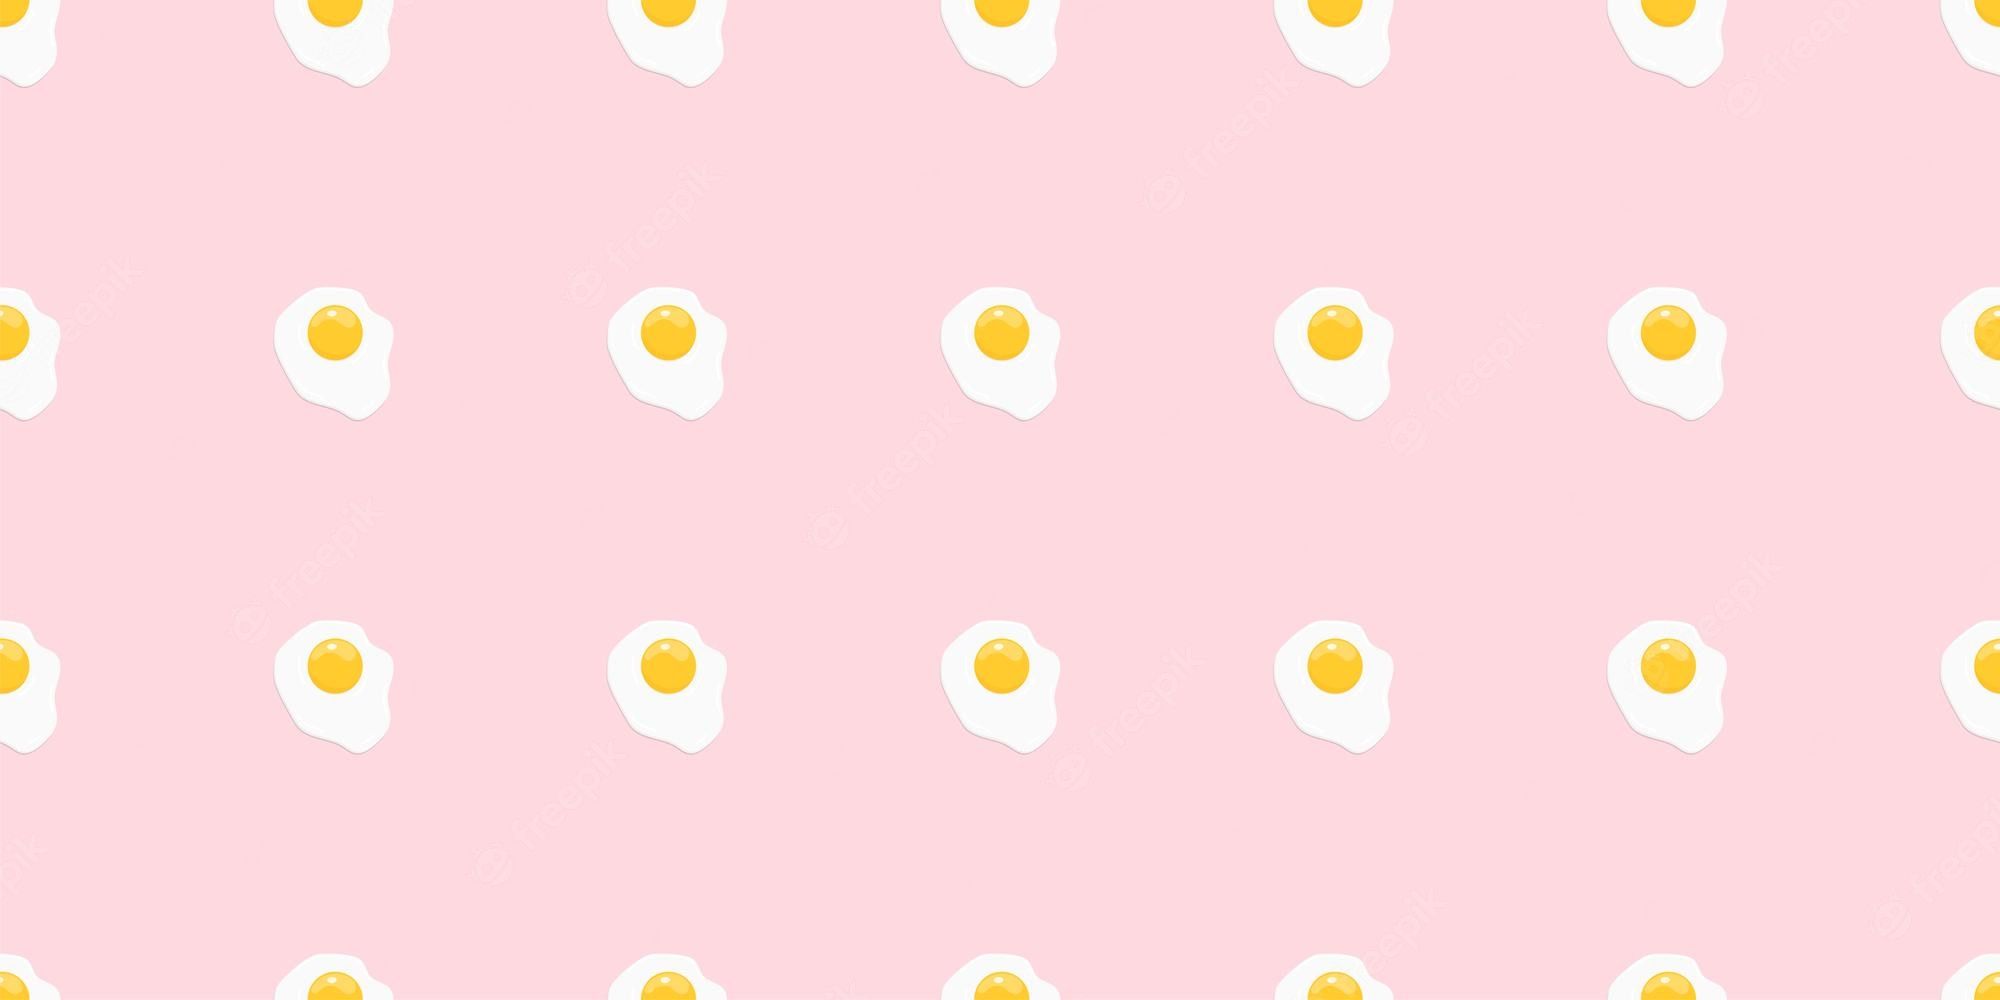 Seamless pattern with eggs on pink background - Egg